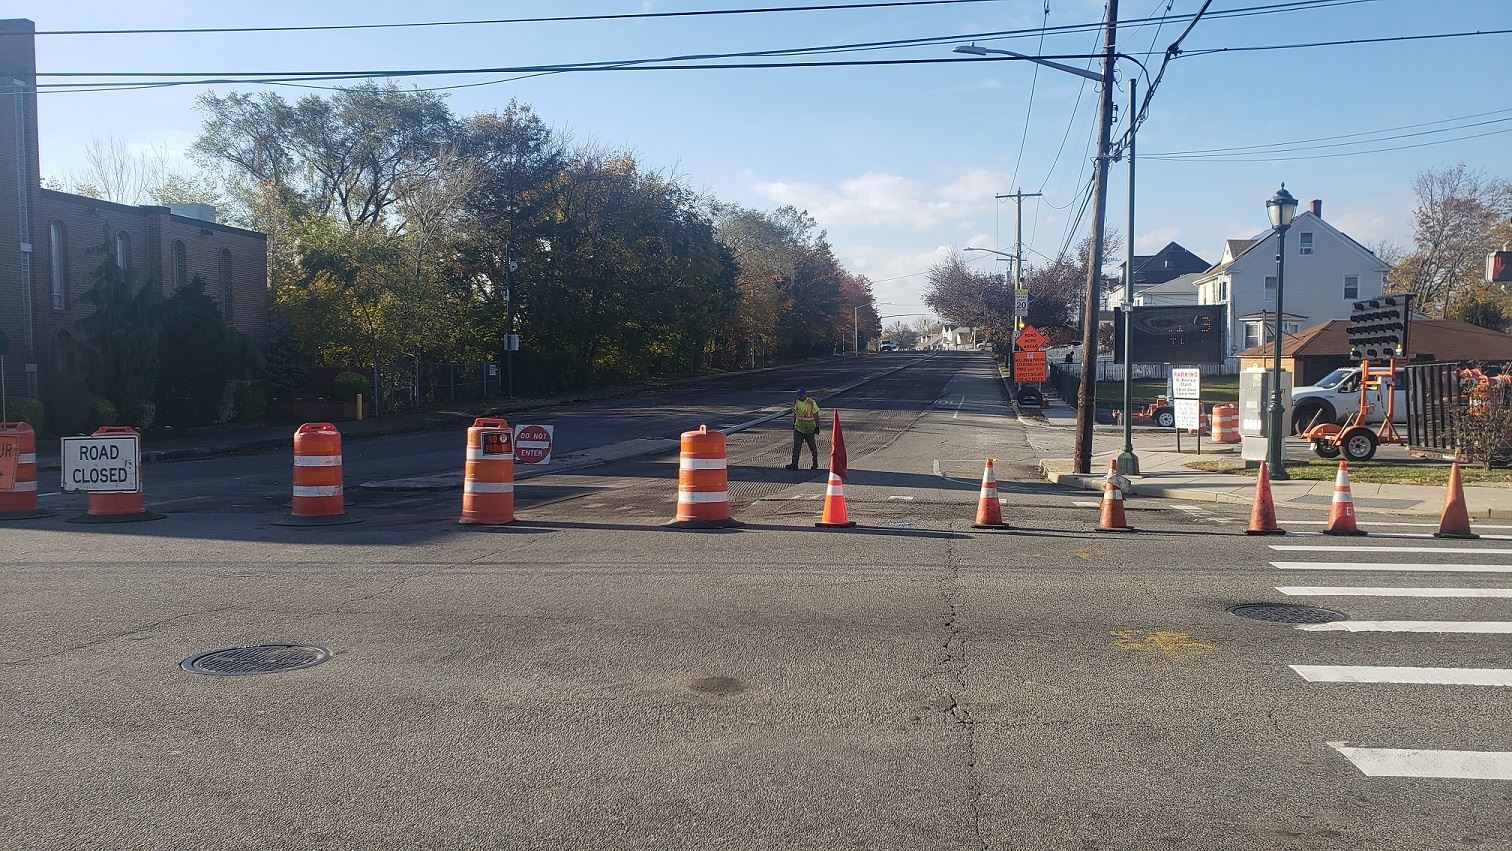 Nassau County recently embarked upon repaving and restriping of Dutch Broadway in Elmont. The County will implement preliminary elements of the Elmont Traffic Safety Evaluation into the project.